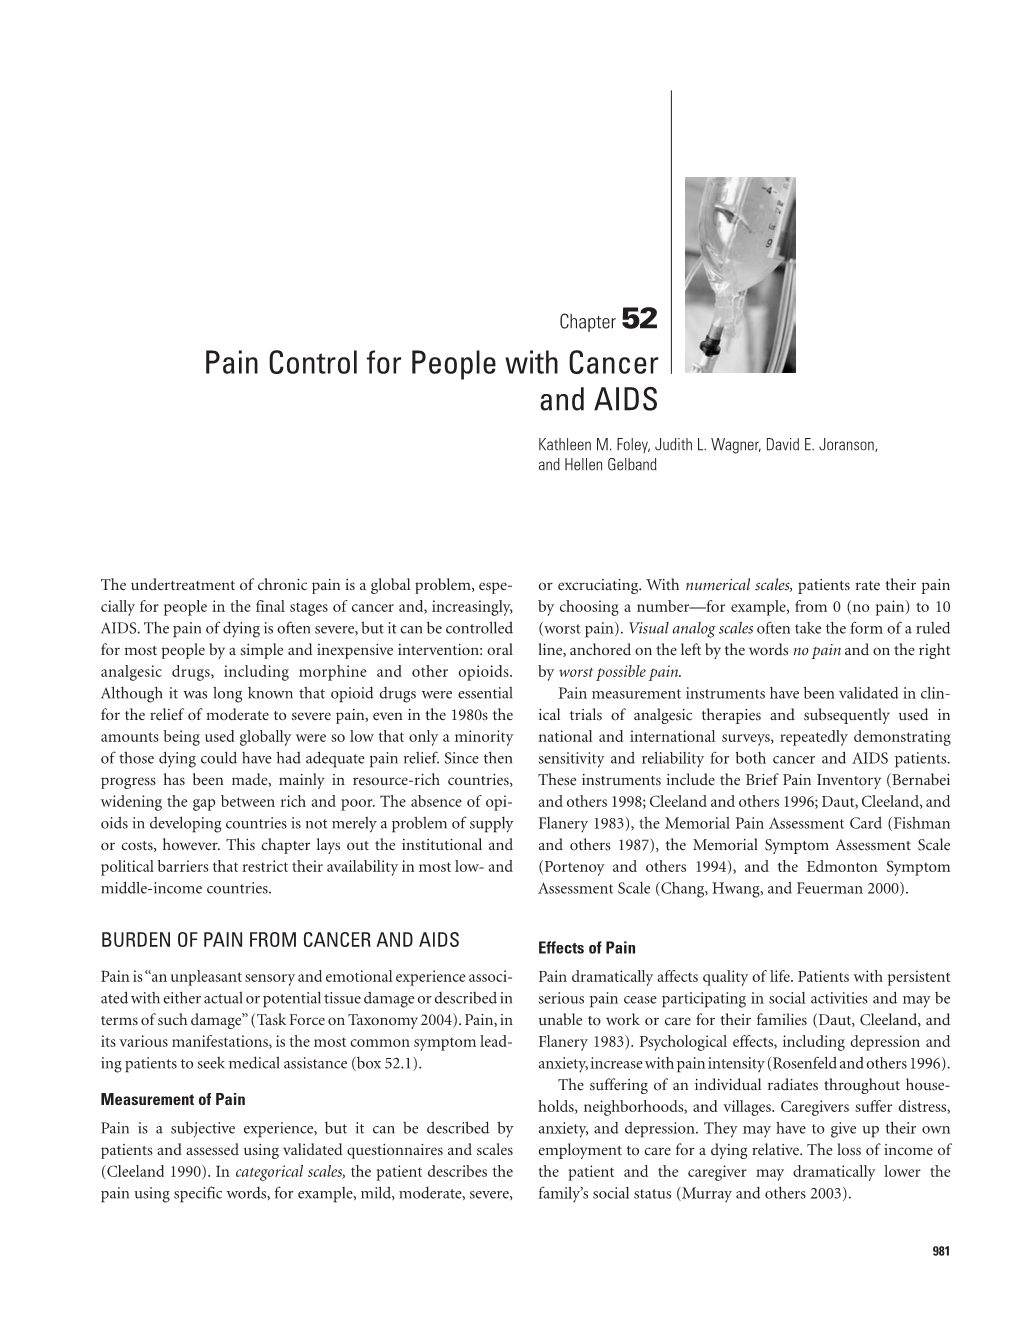 Pain Control for People with Cancer and AIDS